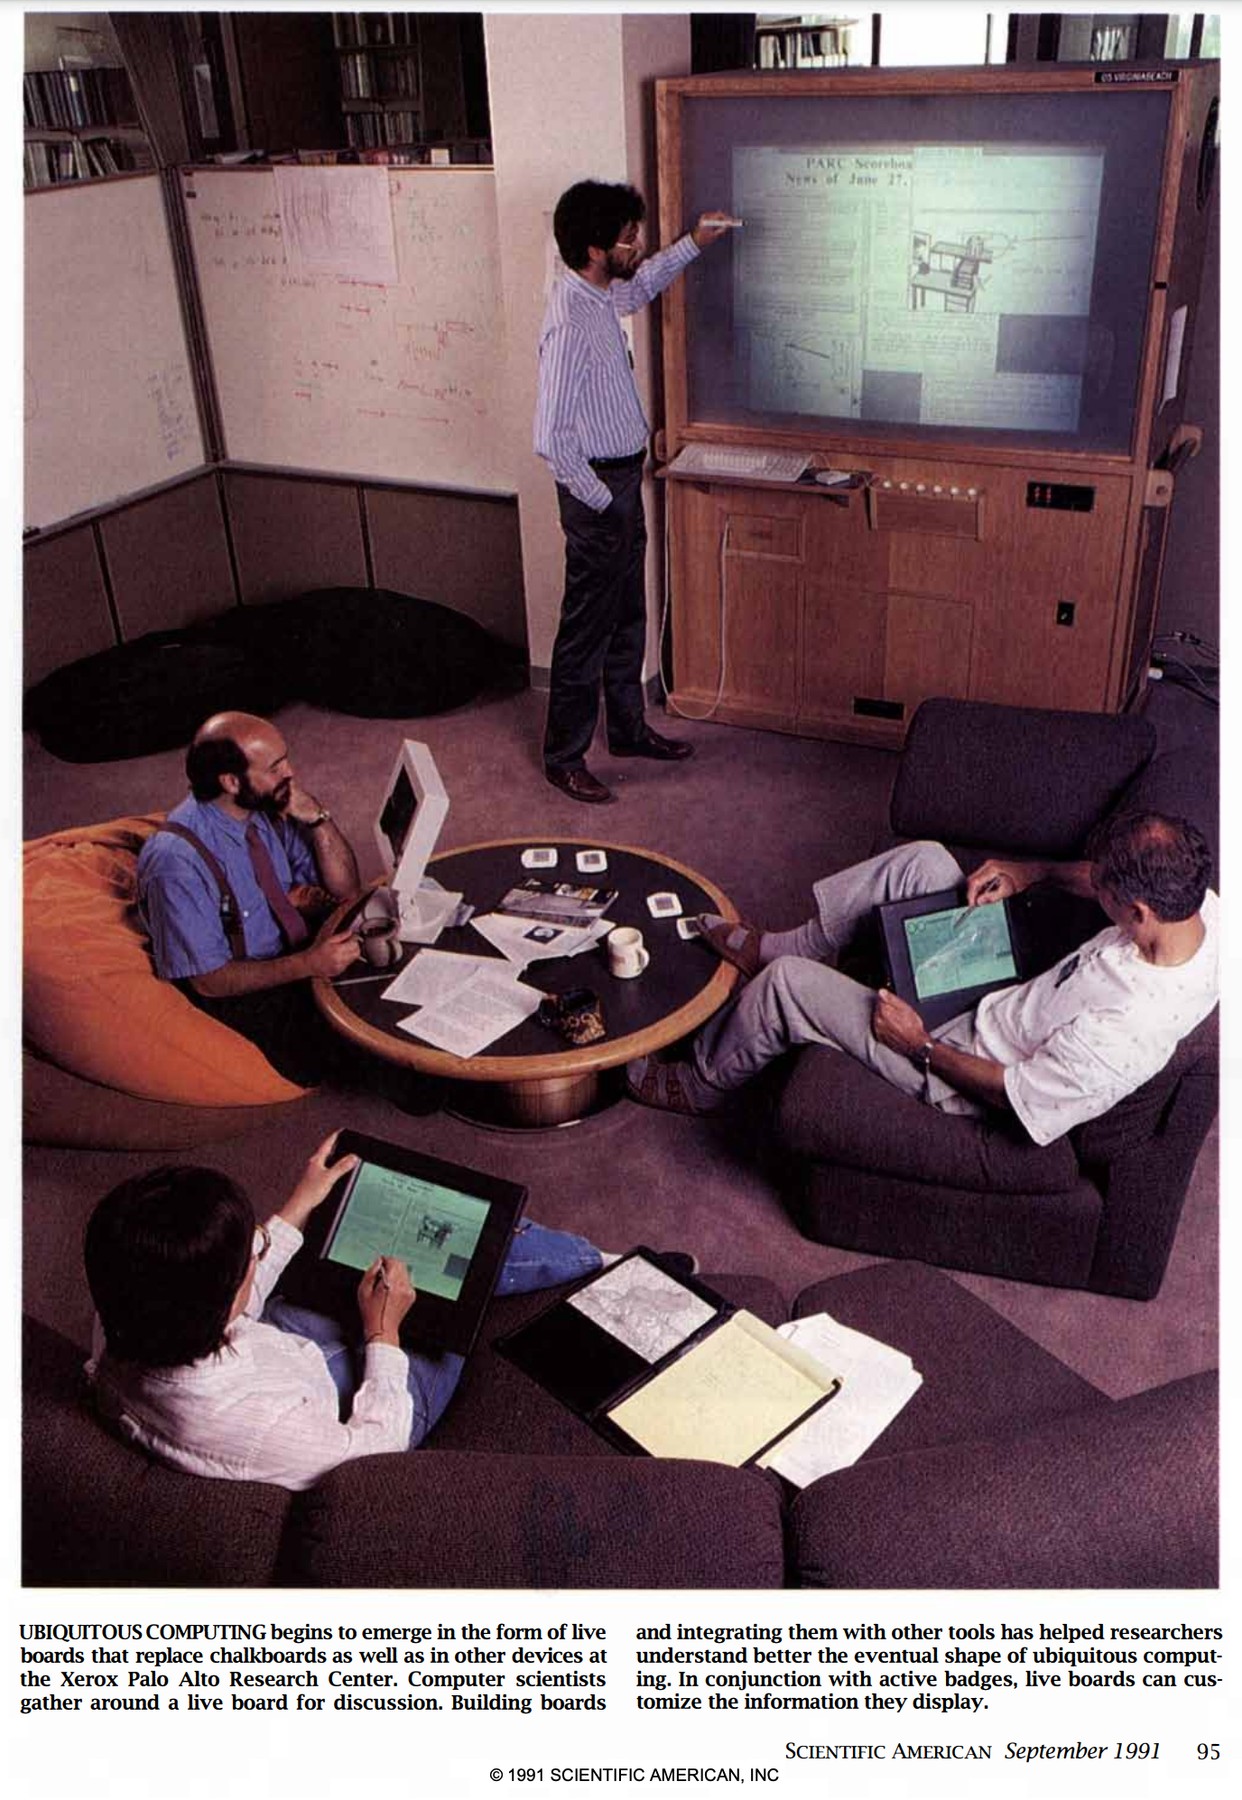 A meeting at the Xerox Palo Alto Research Center in 1991